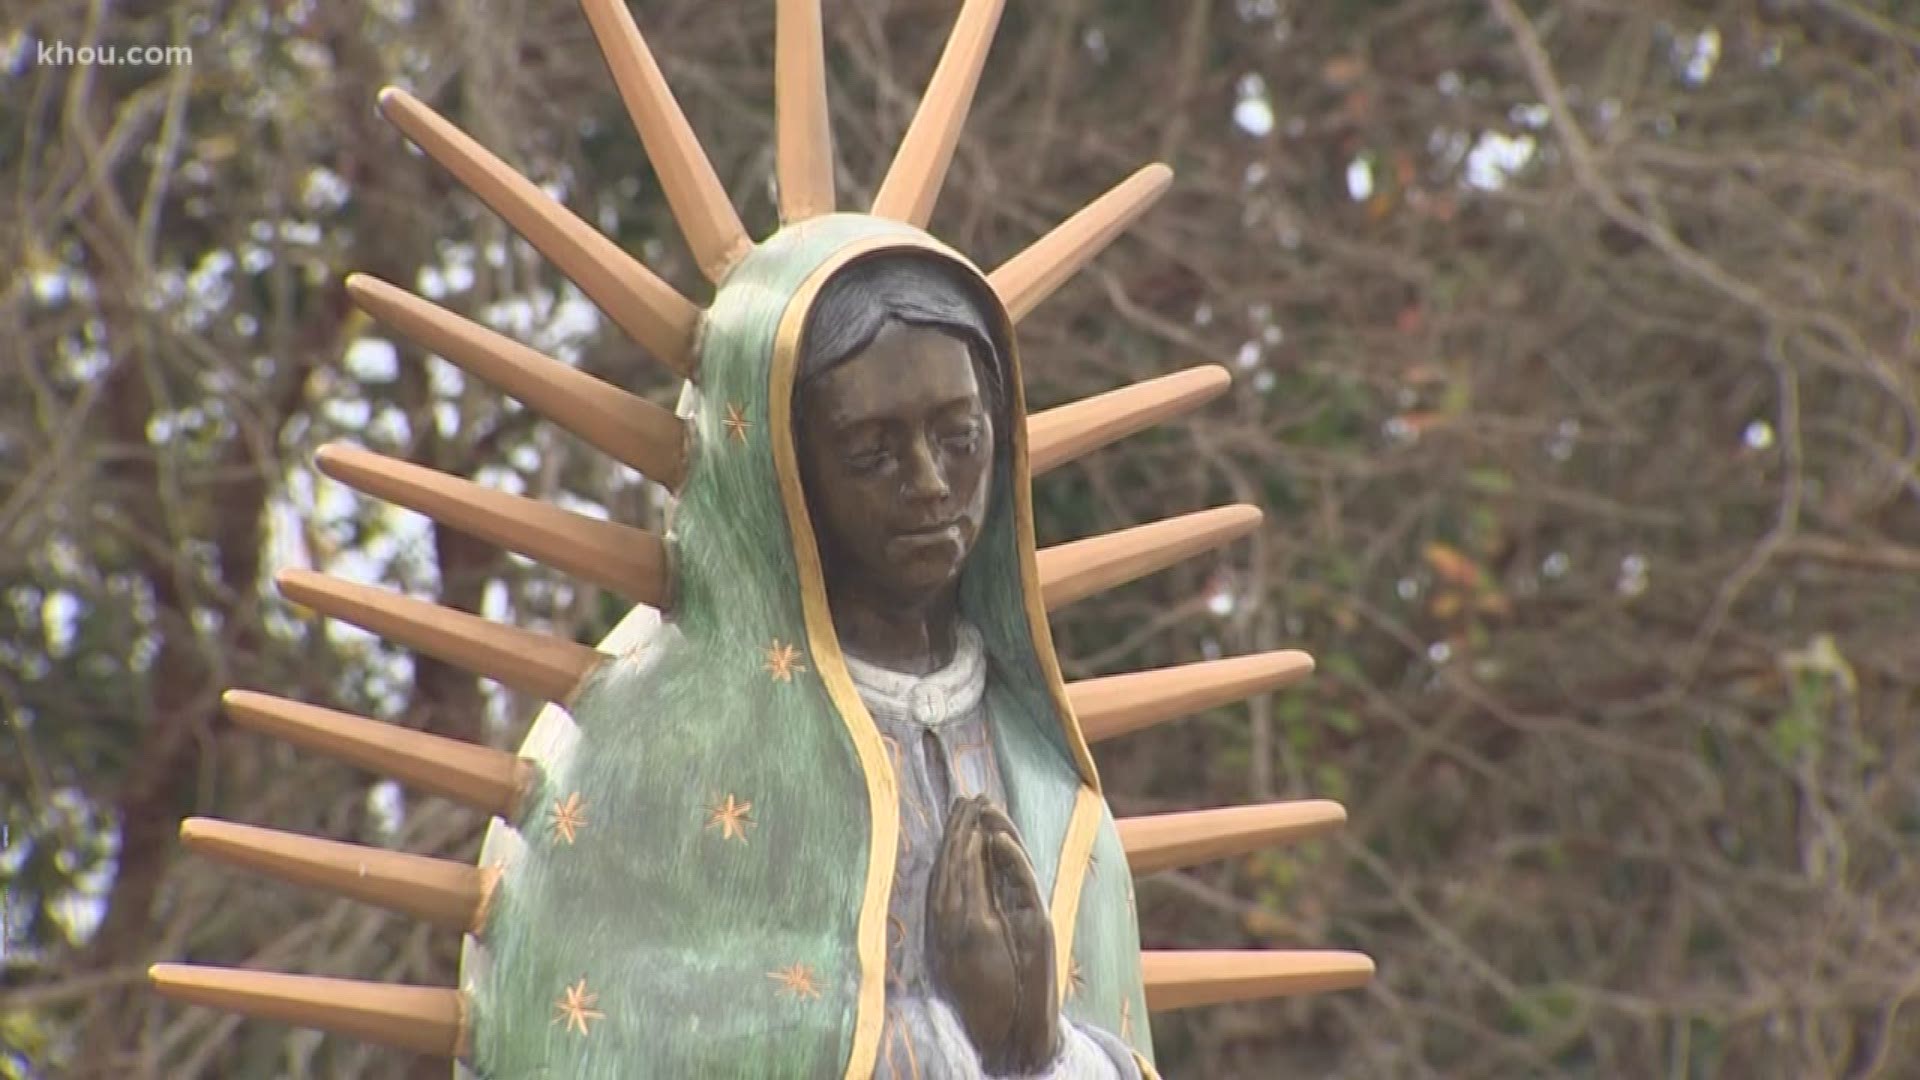 Wednesday was considered the Lady of Guadalupe's birthday. People all across Houston paid homage by stopping at an alter to lay flowers, light candles and pray.